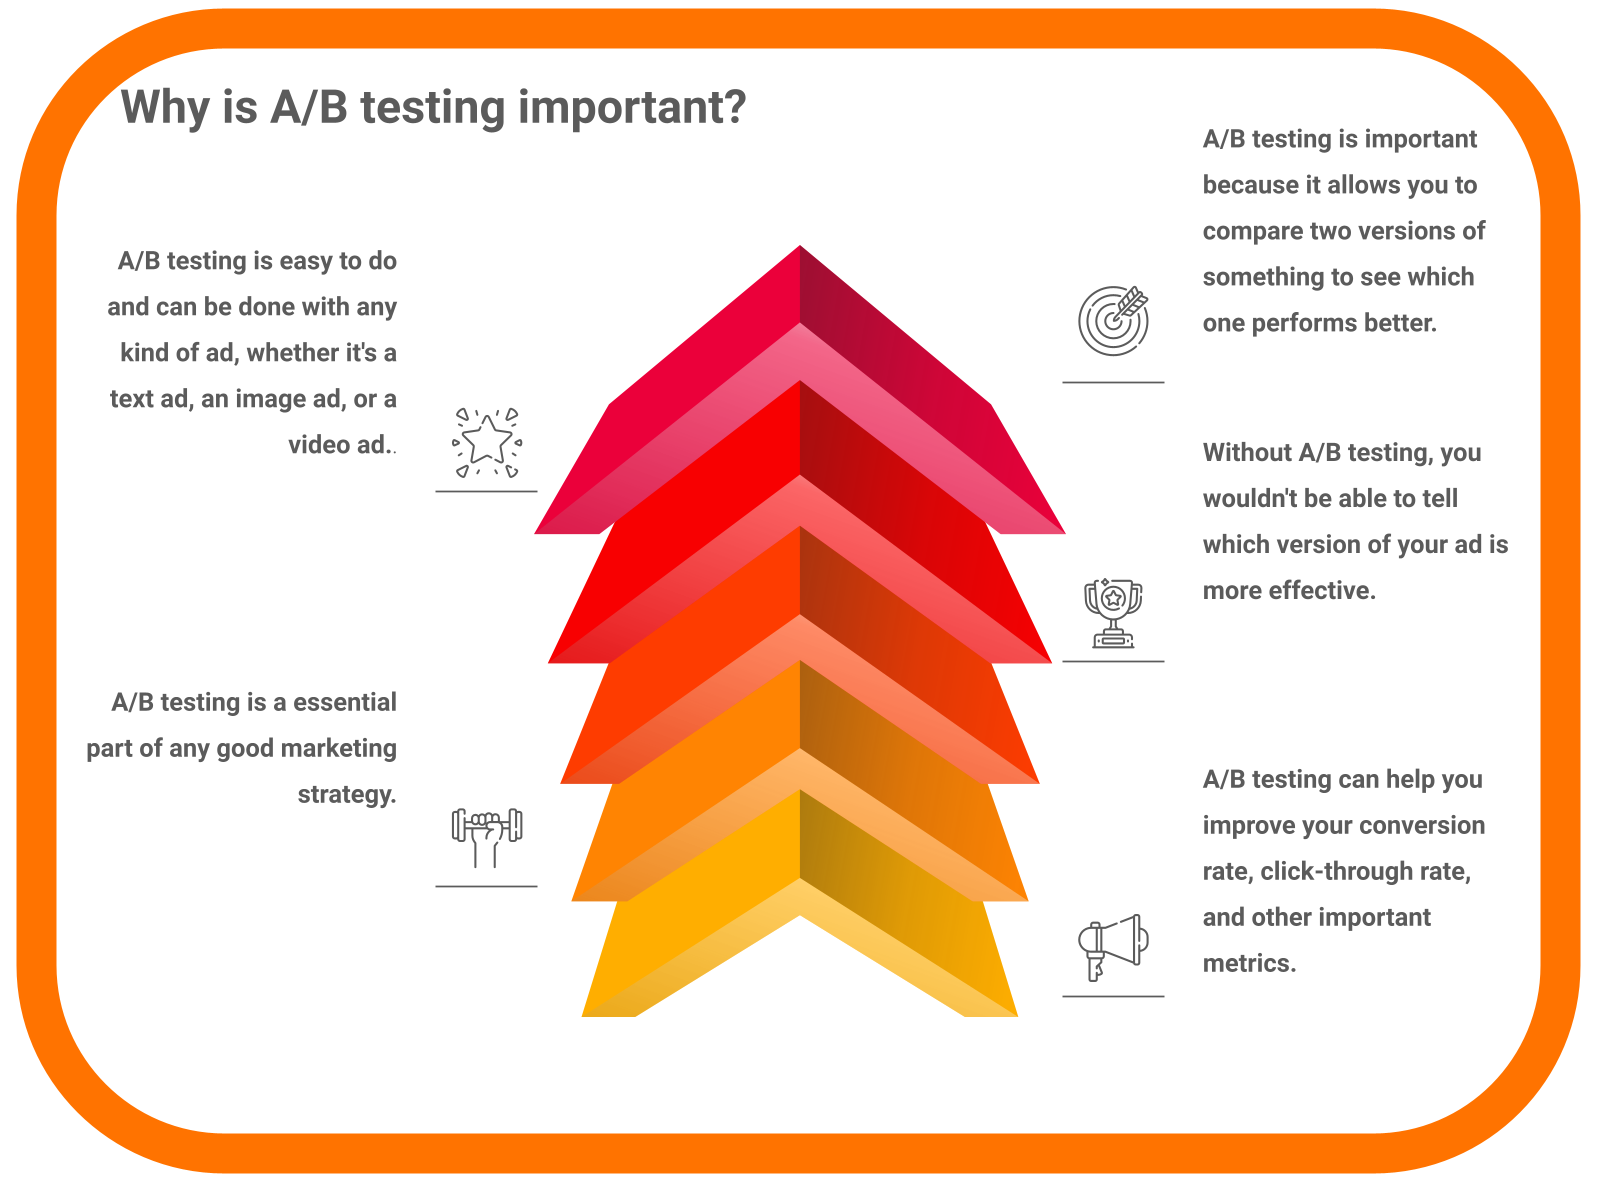 Why is A/B testing important?